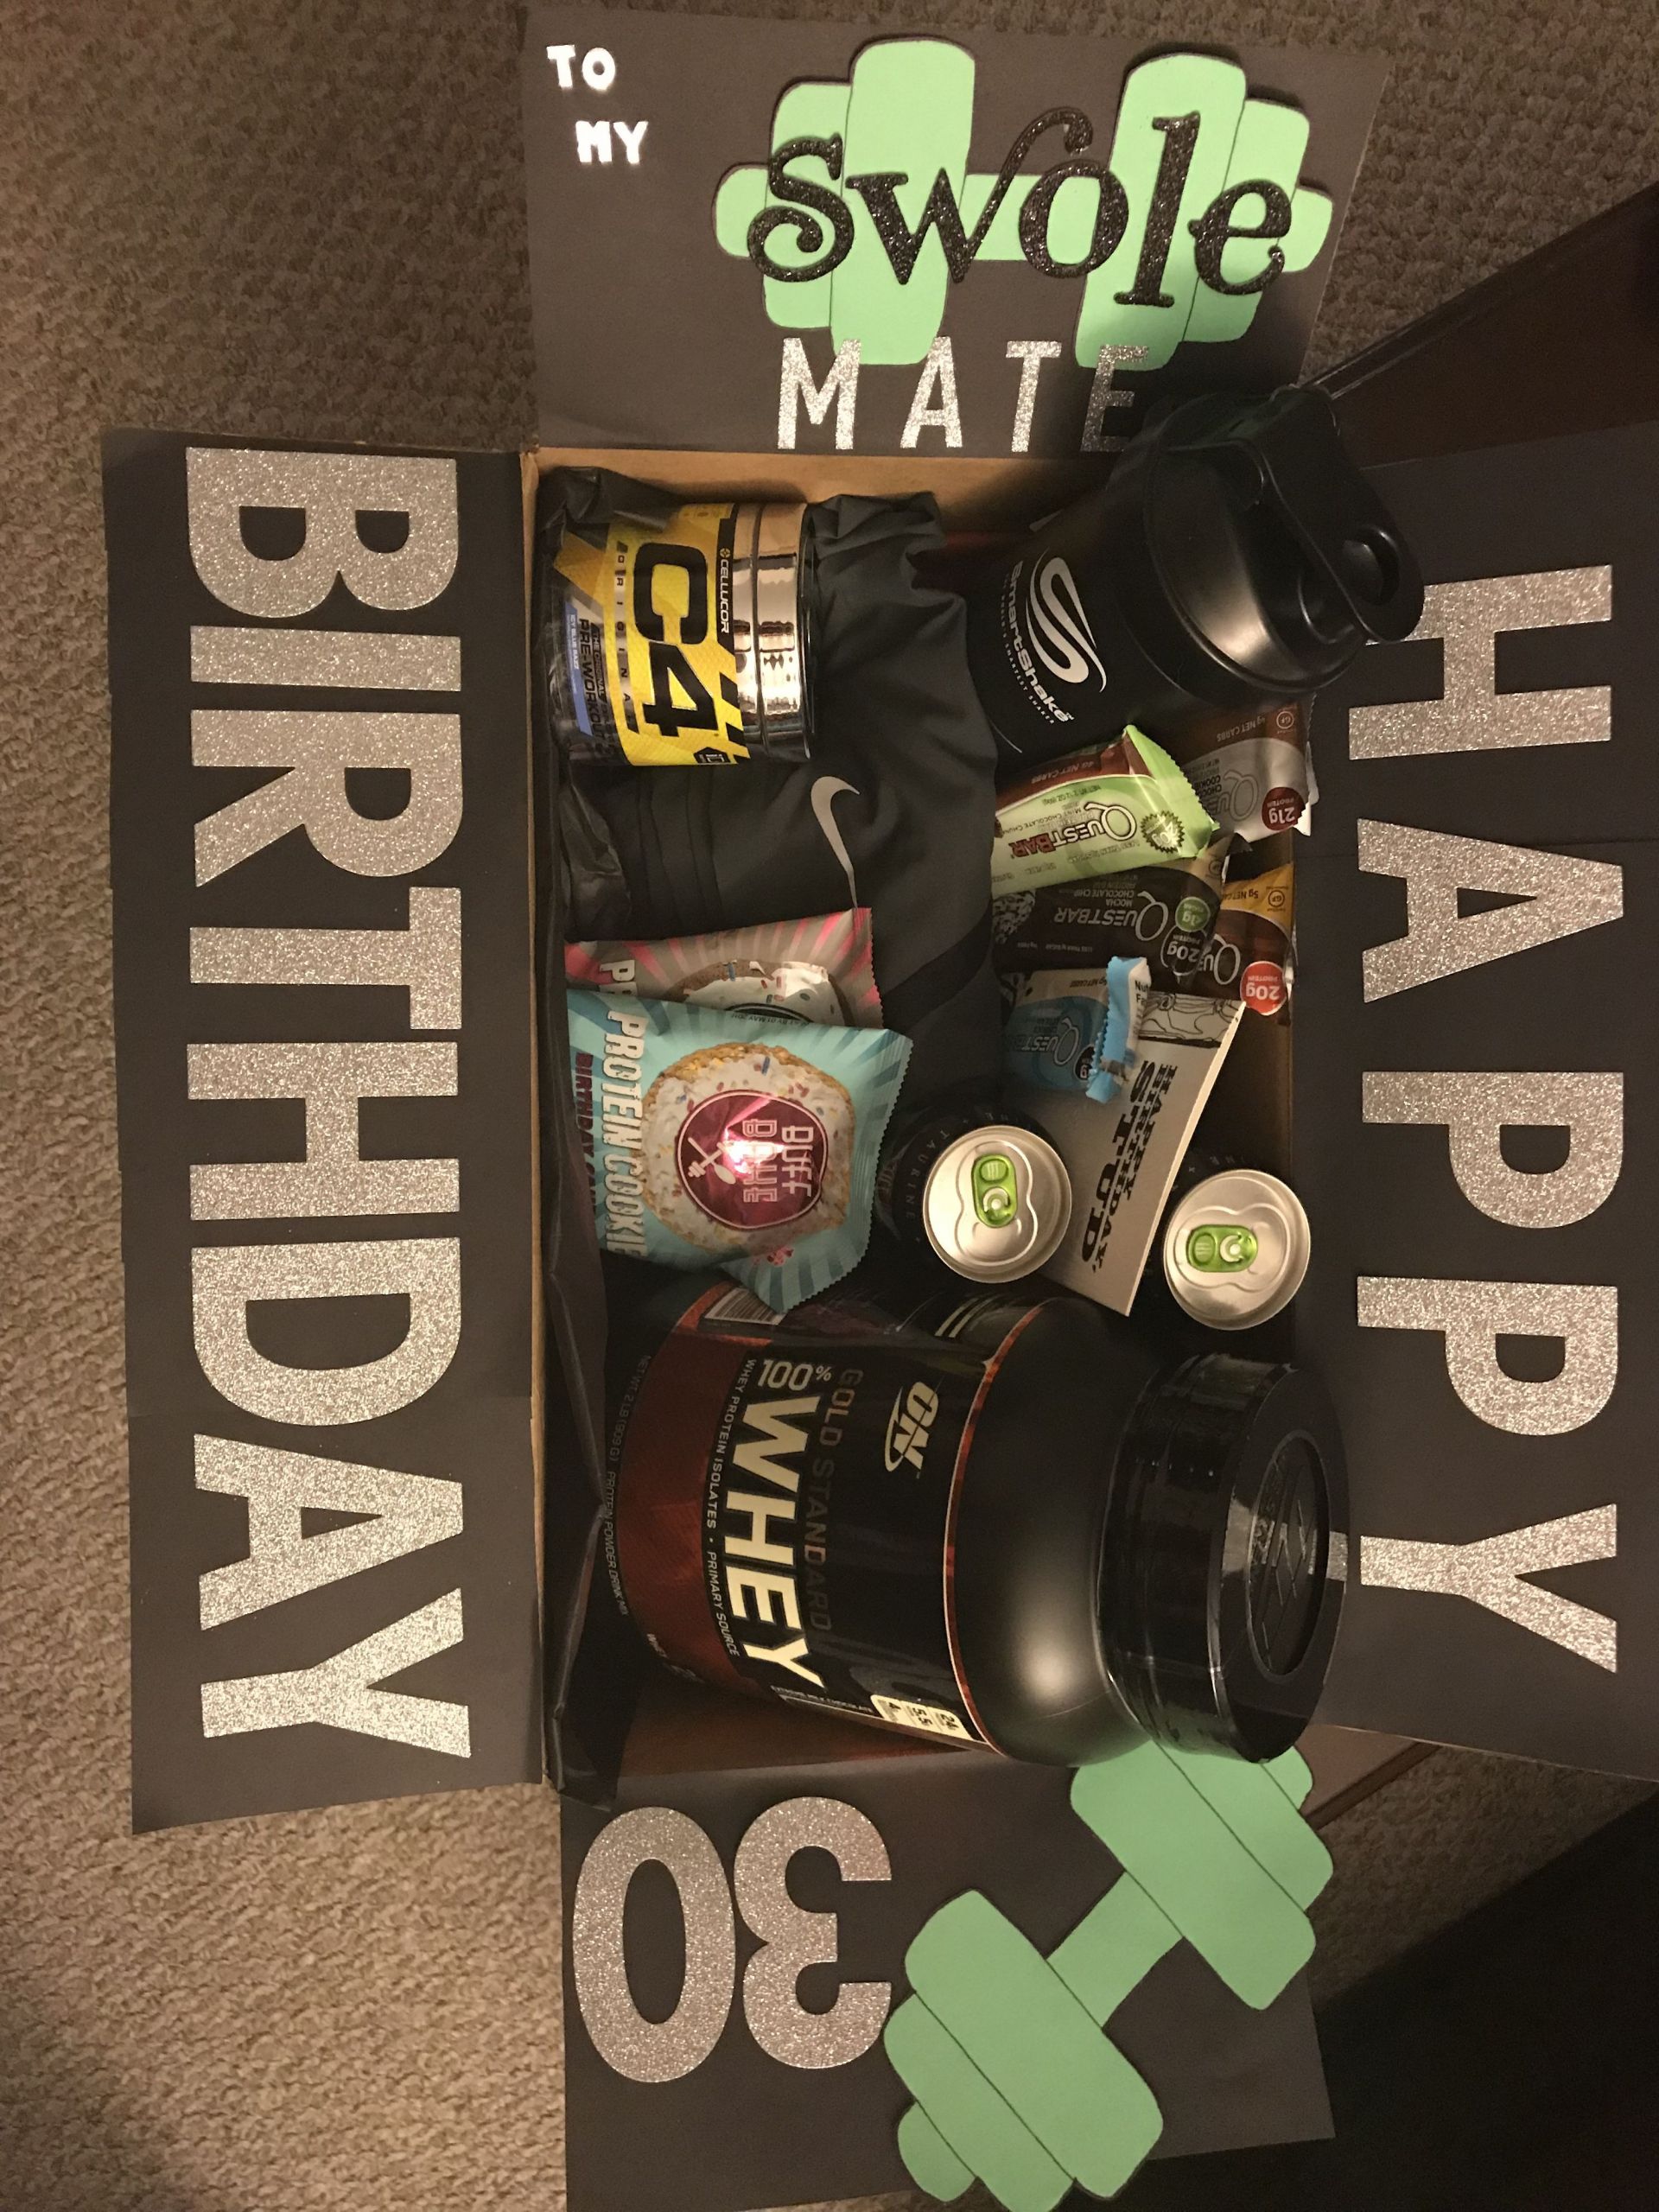 Birthday Gift Ideas For Couples
 Birthday t for swole mate